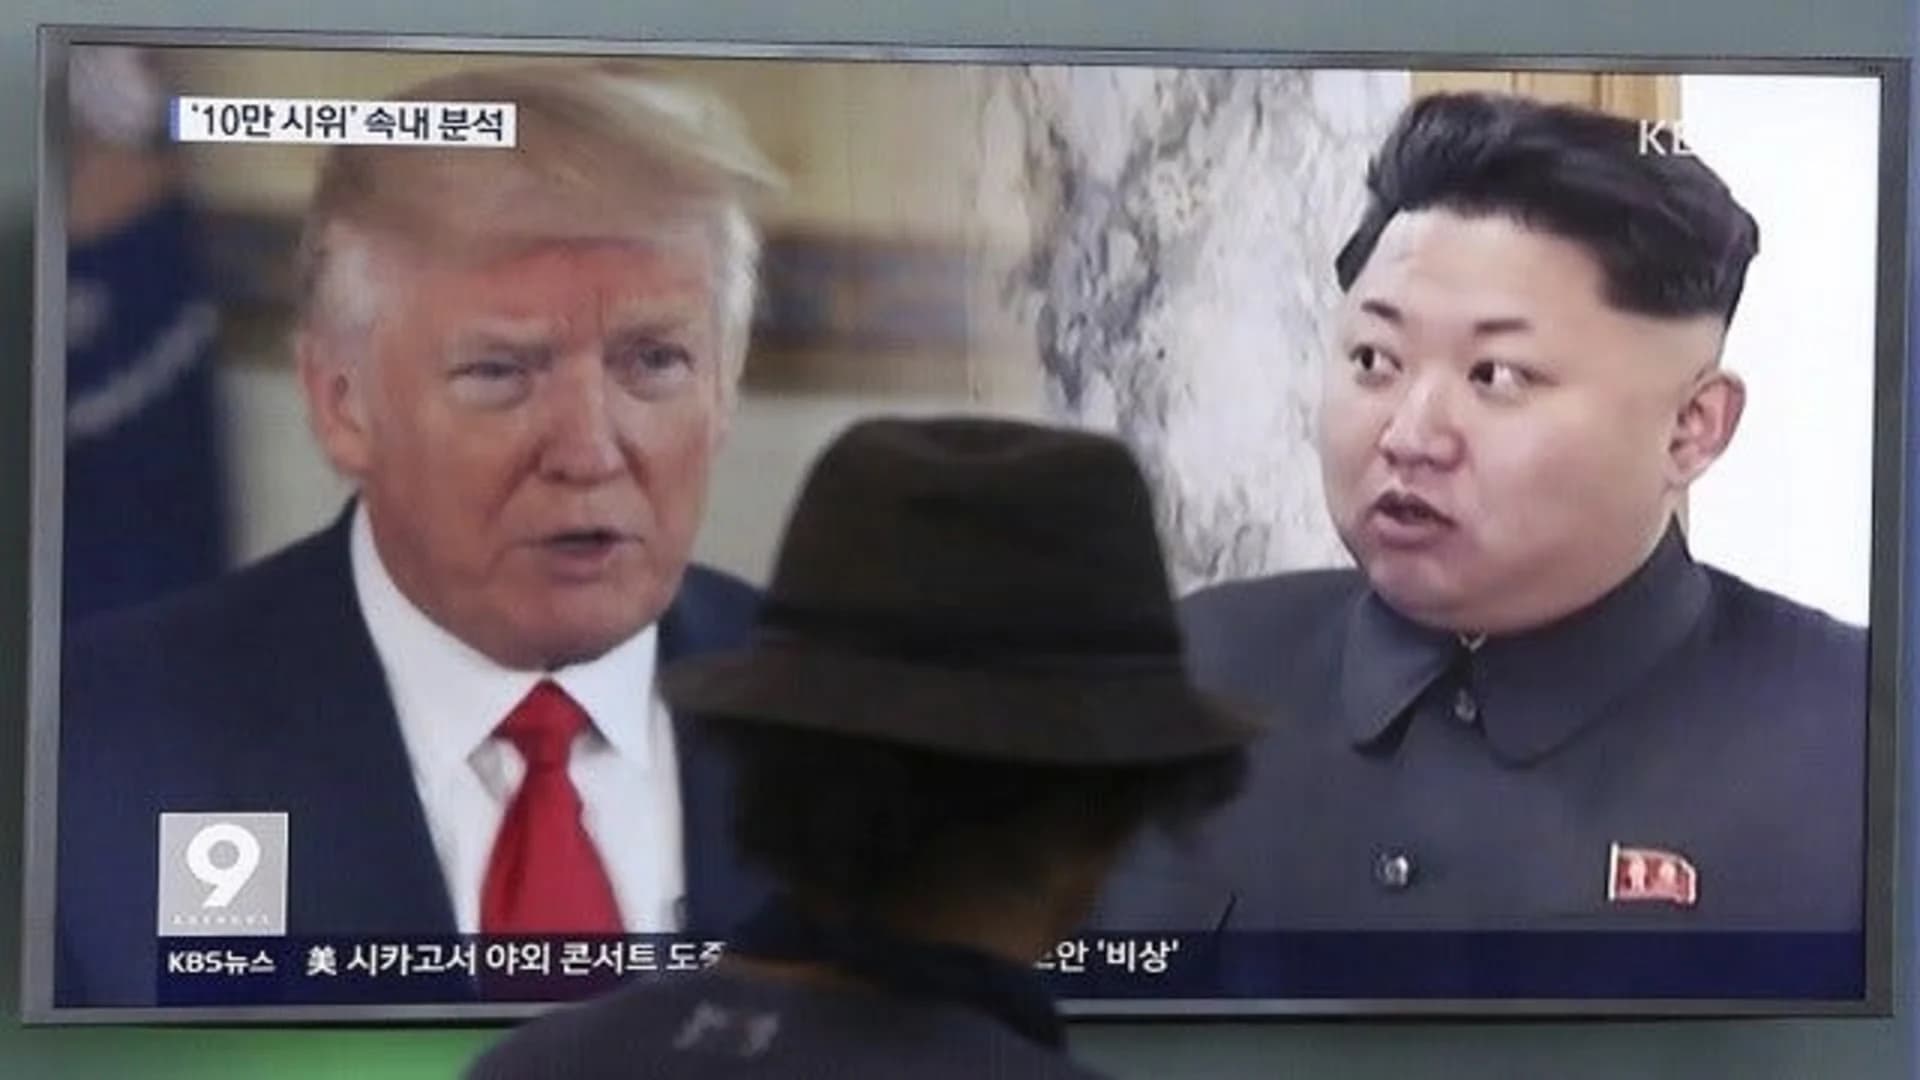 US says it's not pushing for regime change in North Korea